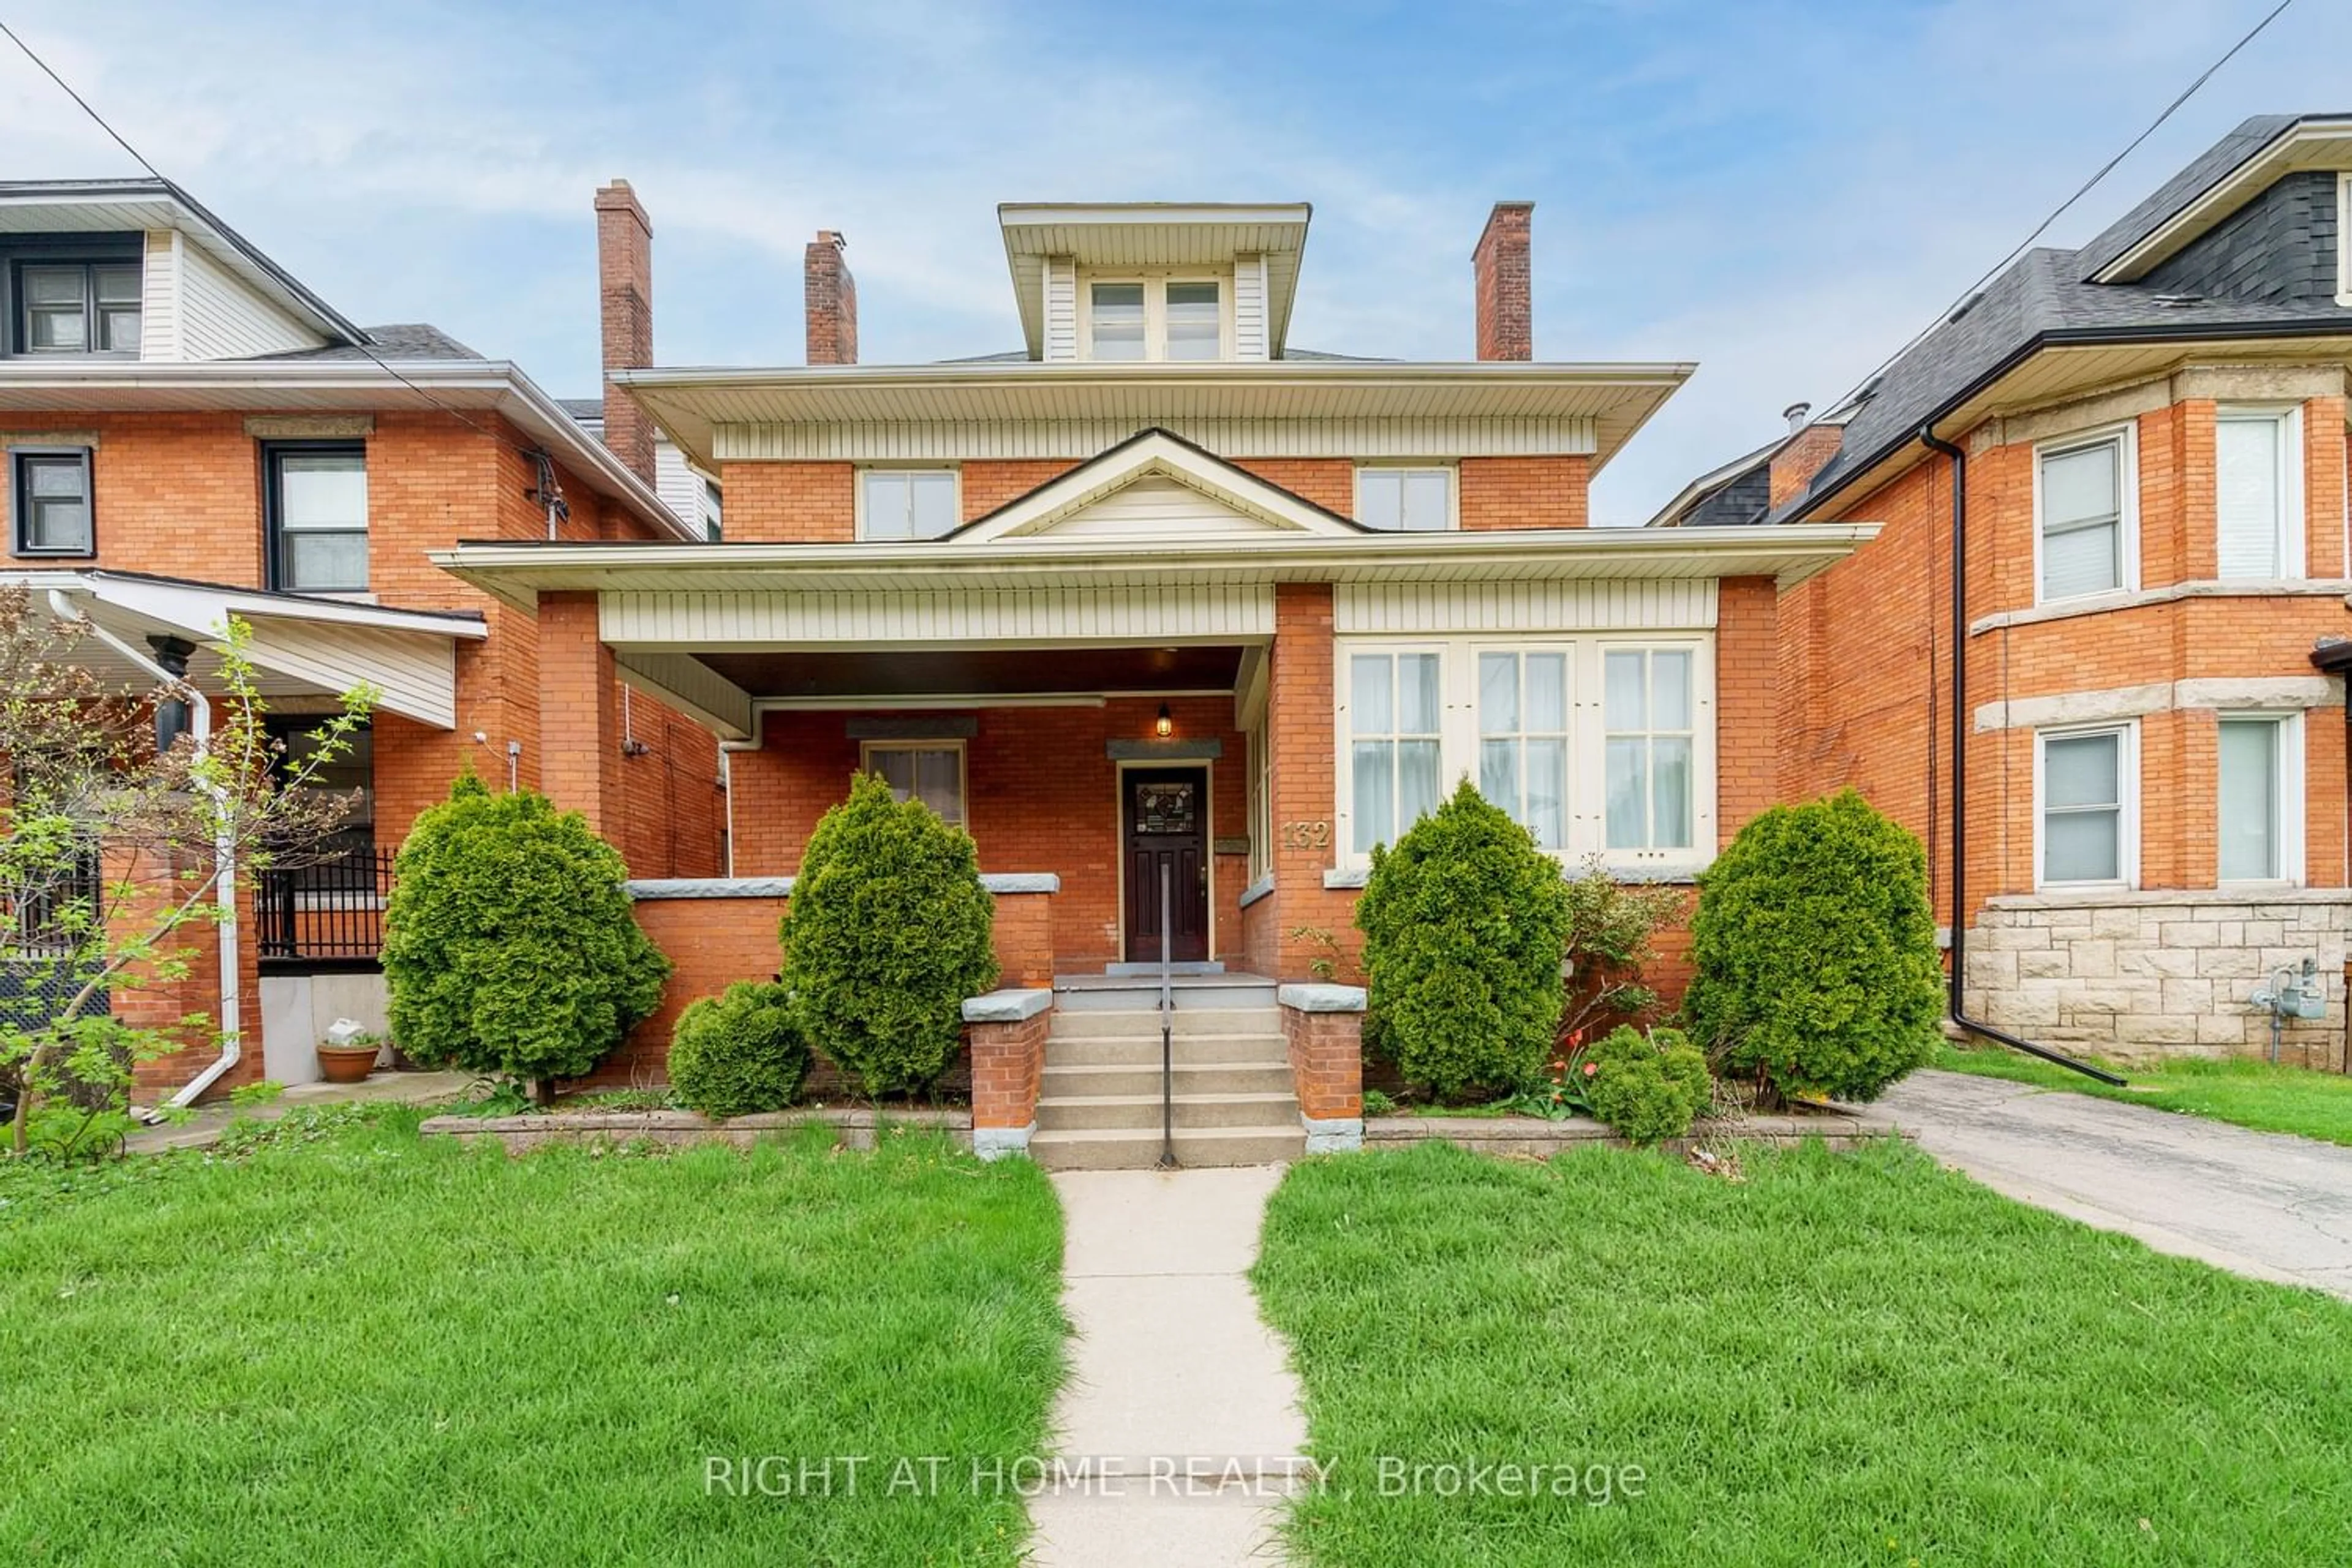 Home with brick exterior material for 132 Holton Ave, Hamilton Ontario L8M 2L5